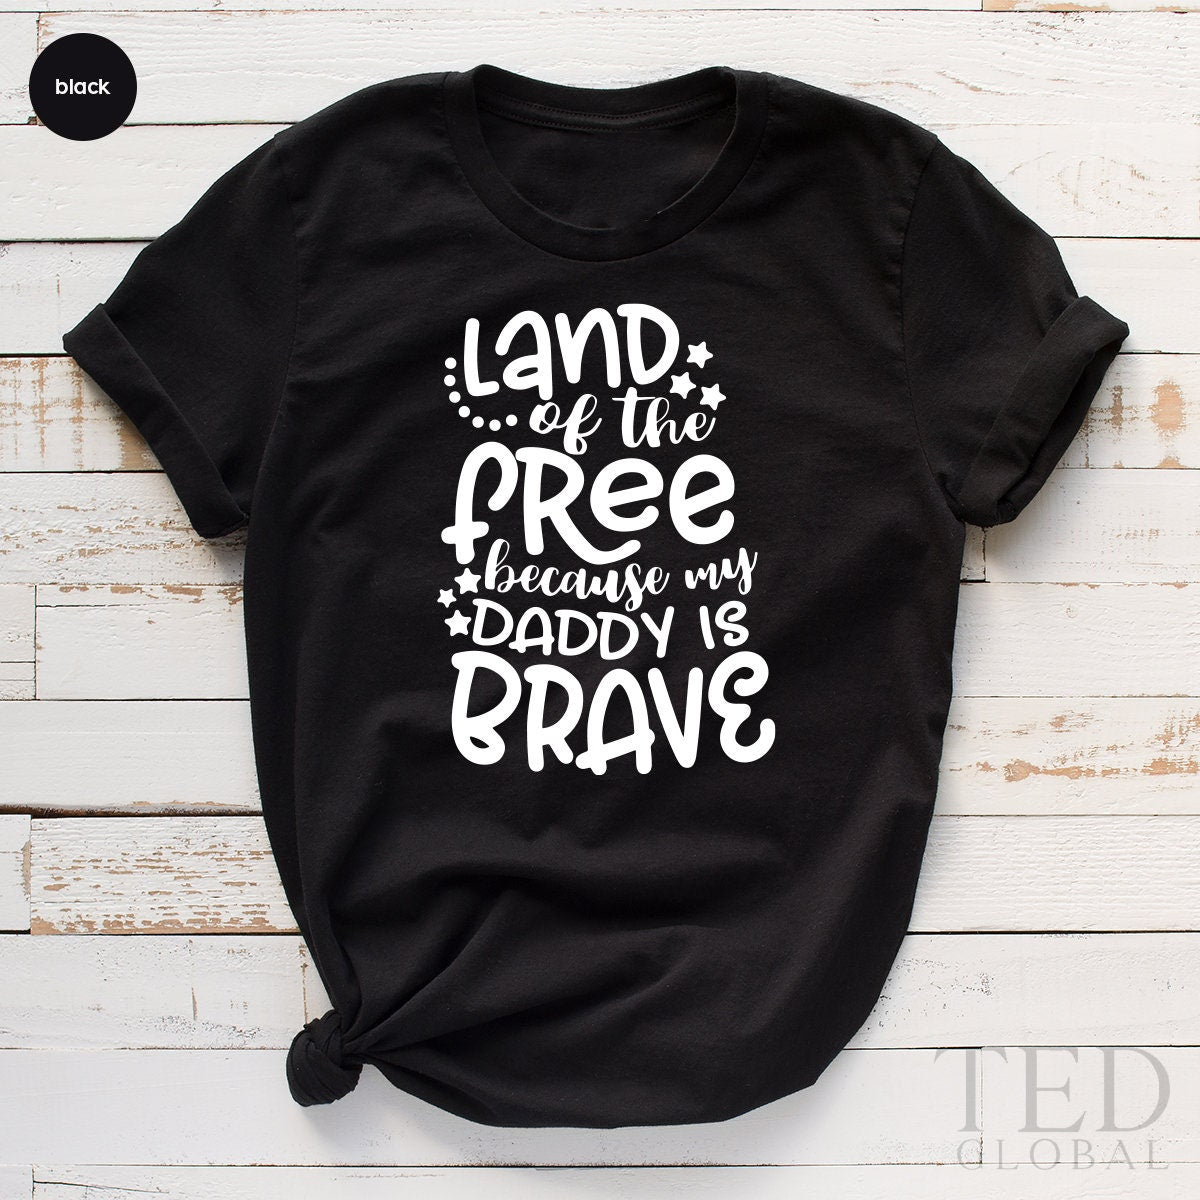 Best Dad T-Shirt,My Daddy Is Brave T Shirt,Patriotic Papa Shirt,Veteran Father Tshirt,Military Father Clothing,Army Men Top,Fathers Day Gift - Fastdeliverytees.com